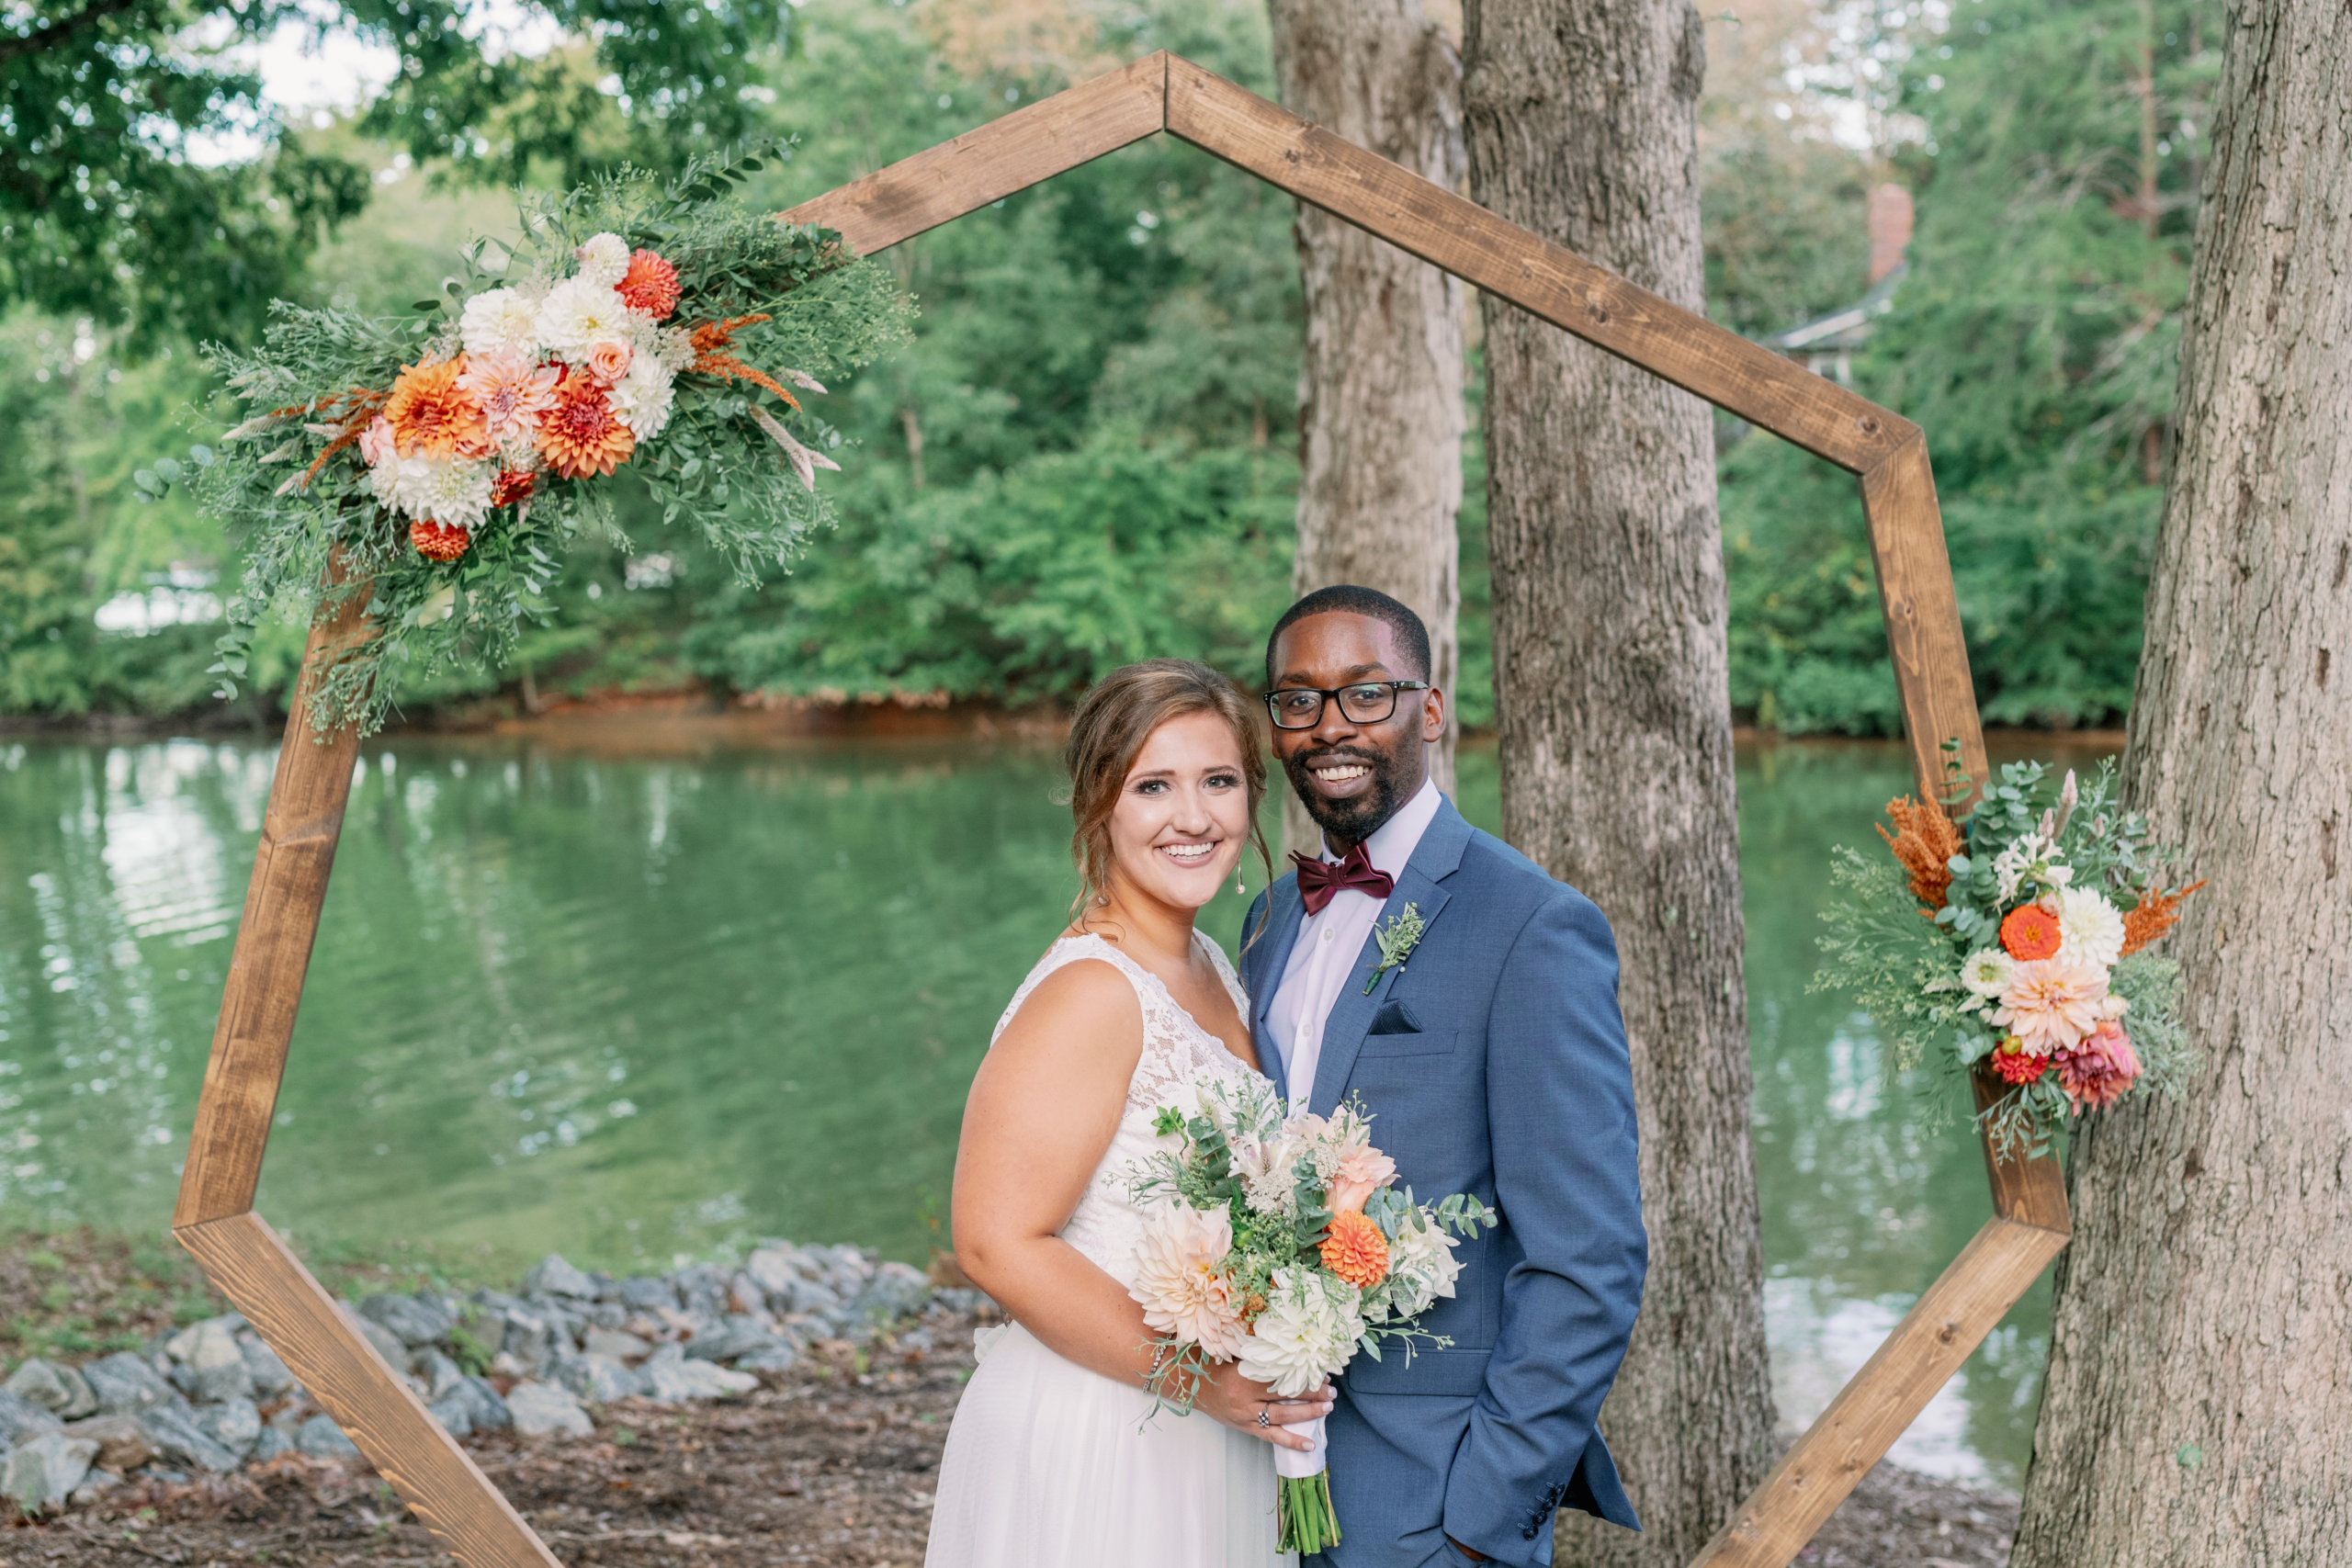 Bride and groom smiling in front of wedding arch